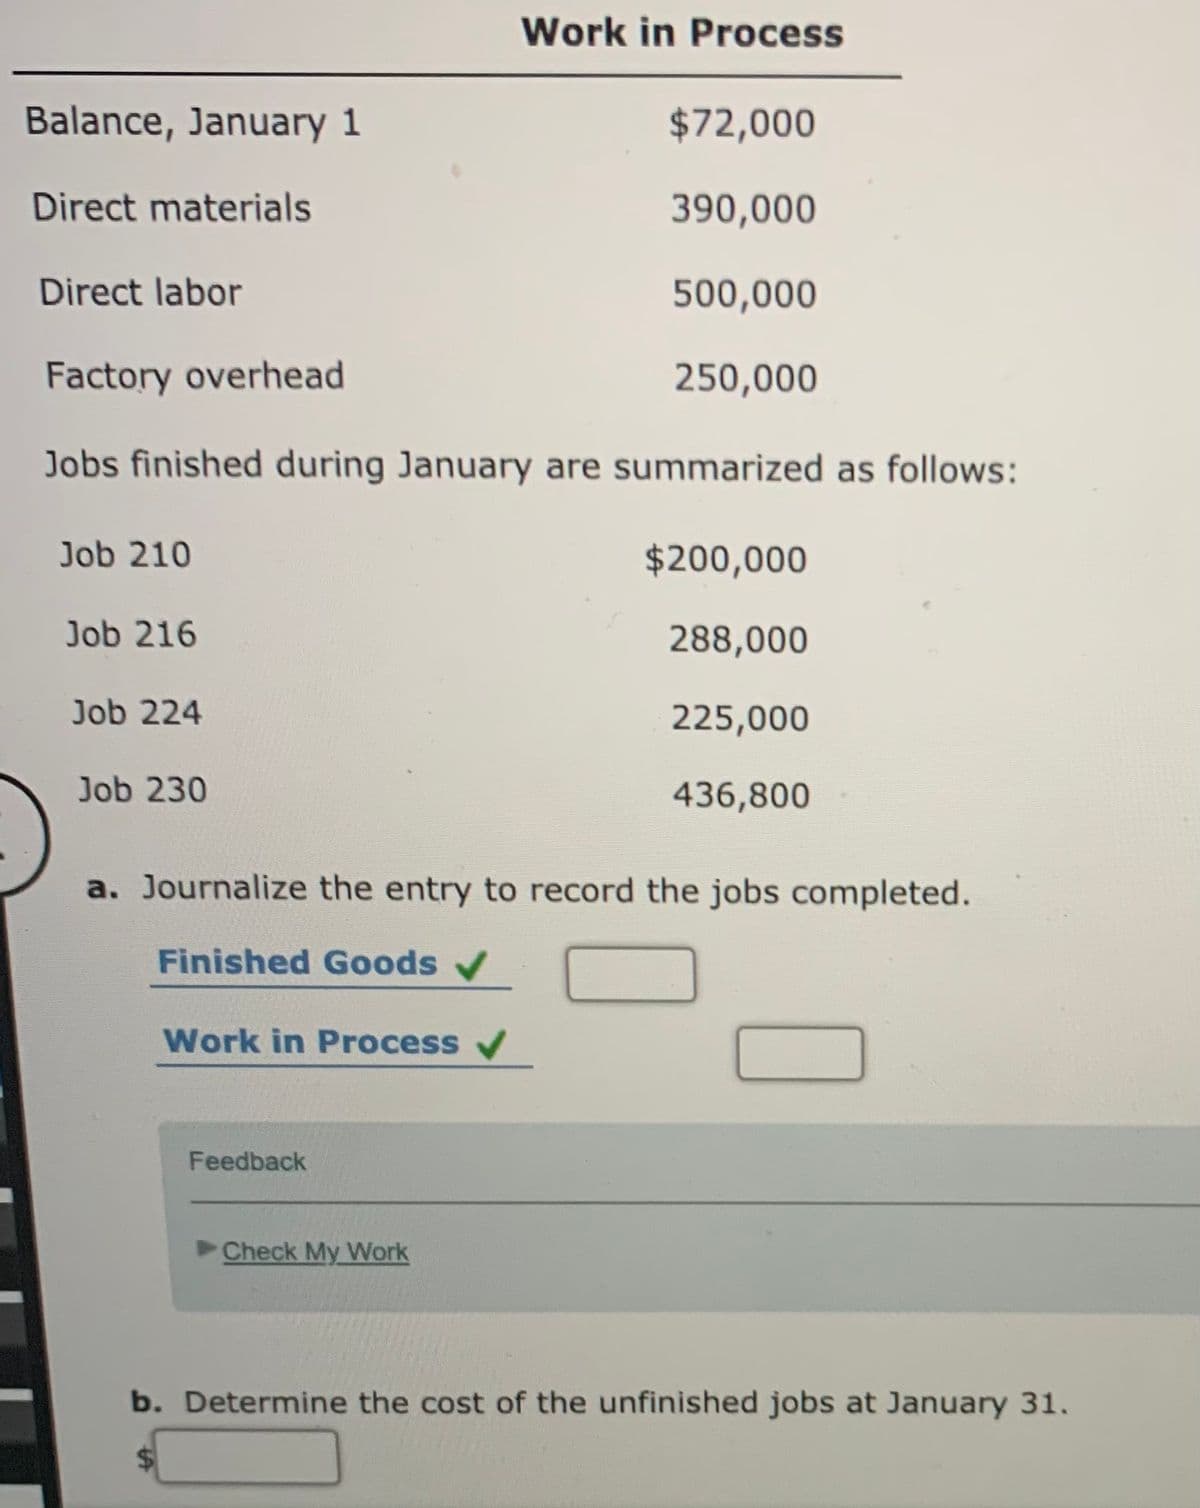 Work in Process
Balance, January 1
$72,000
Direct materials
390,000
Direct labor
500,000
Factory overhead
250,000
Jobs finished during January are summarized as follows:
Job 210
$200,000
Job 216
288,000
Job 224
225,000
Job 230
436,800
a. Journalize the entry to record the jobs completed.
Finished Goods
Work in Process /
Feedback
Check My Work
b. Determine the cost of the unfinished jobs at January 31.
